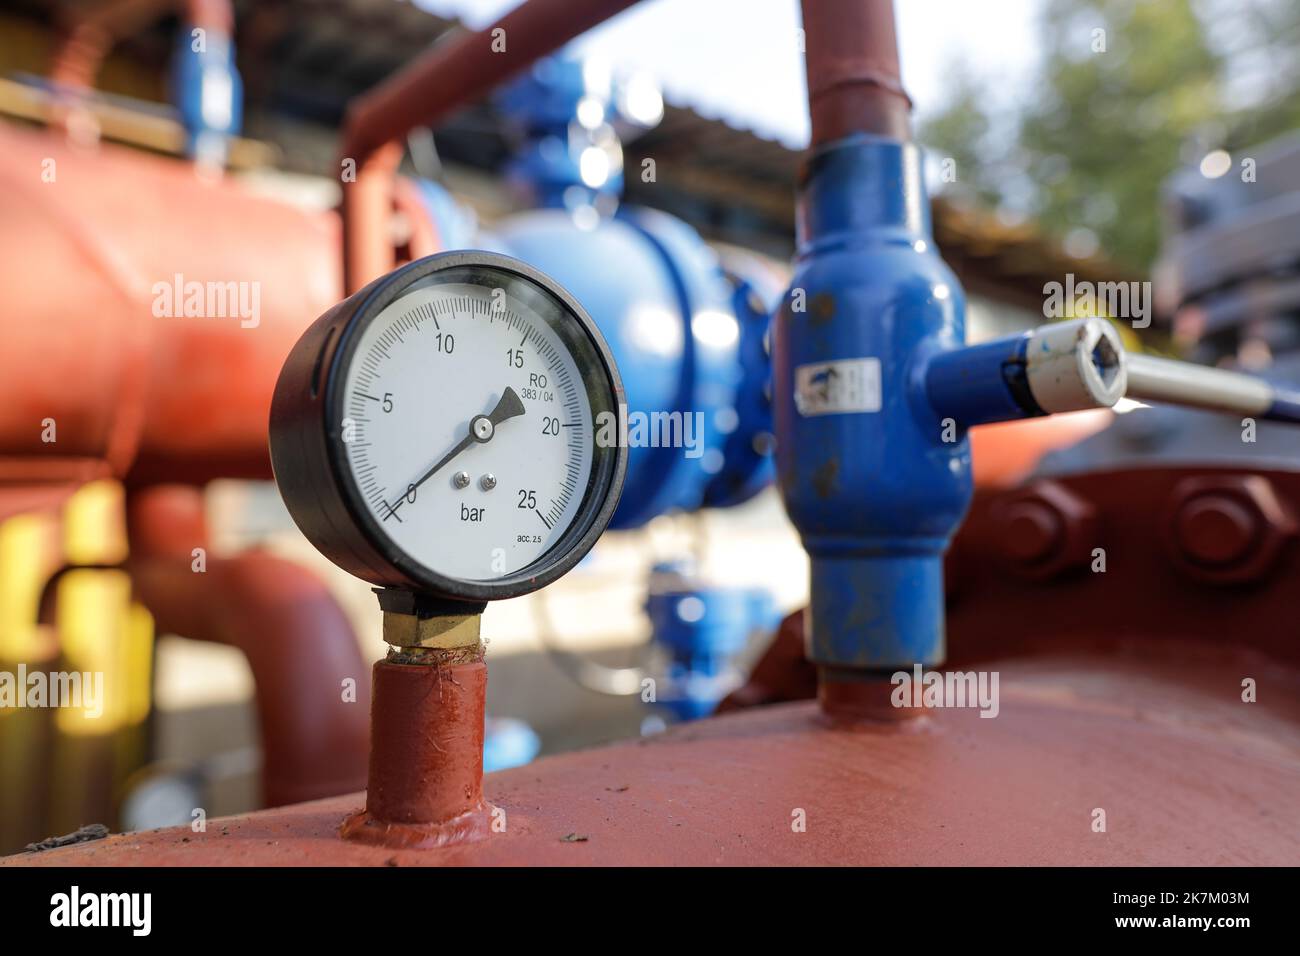 Shallow depth of field (selective focus) details with industrial pressure gauge on an industrial metallic hot water pipeline. Stock Photo